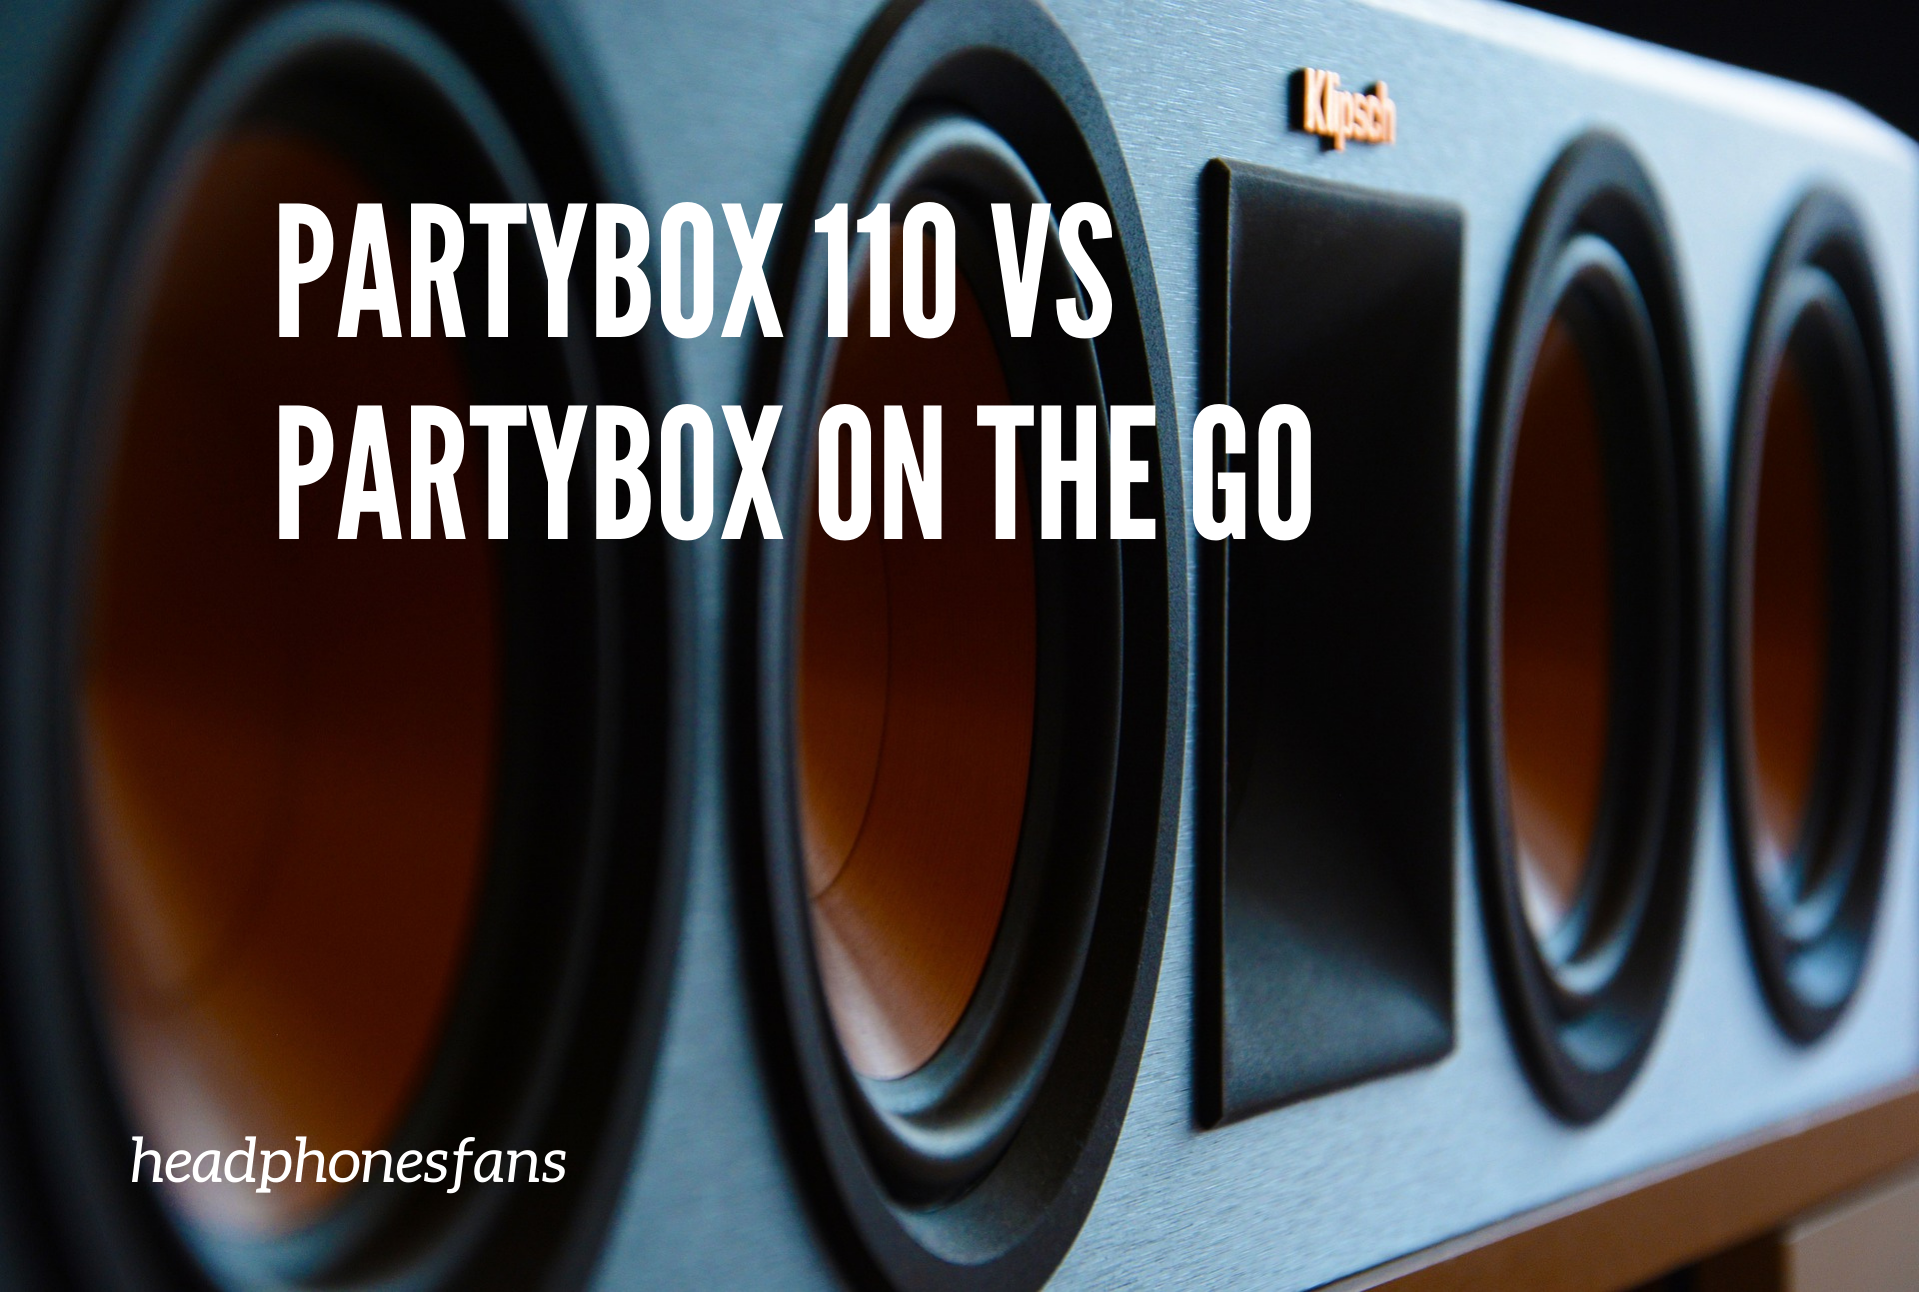 partybox 110 vs partybox on the go